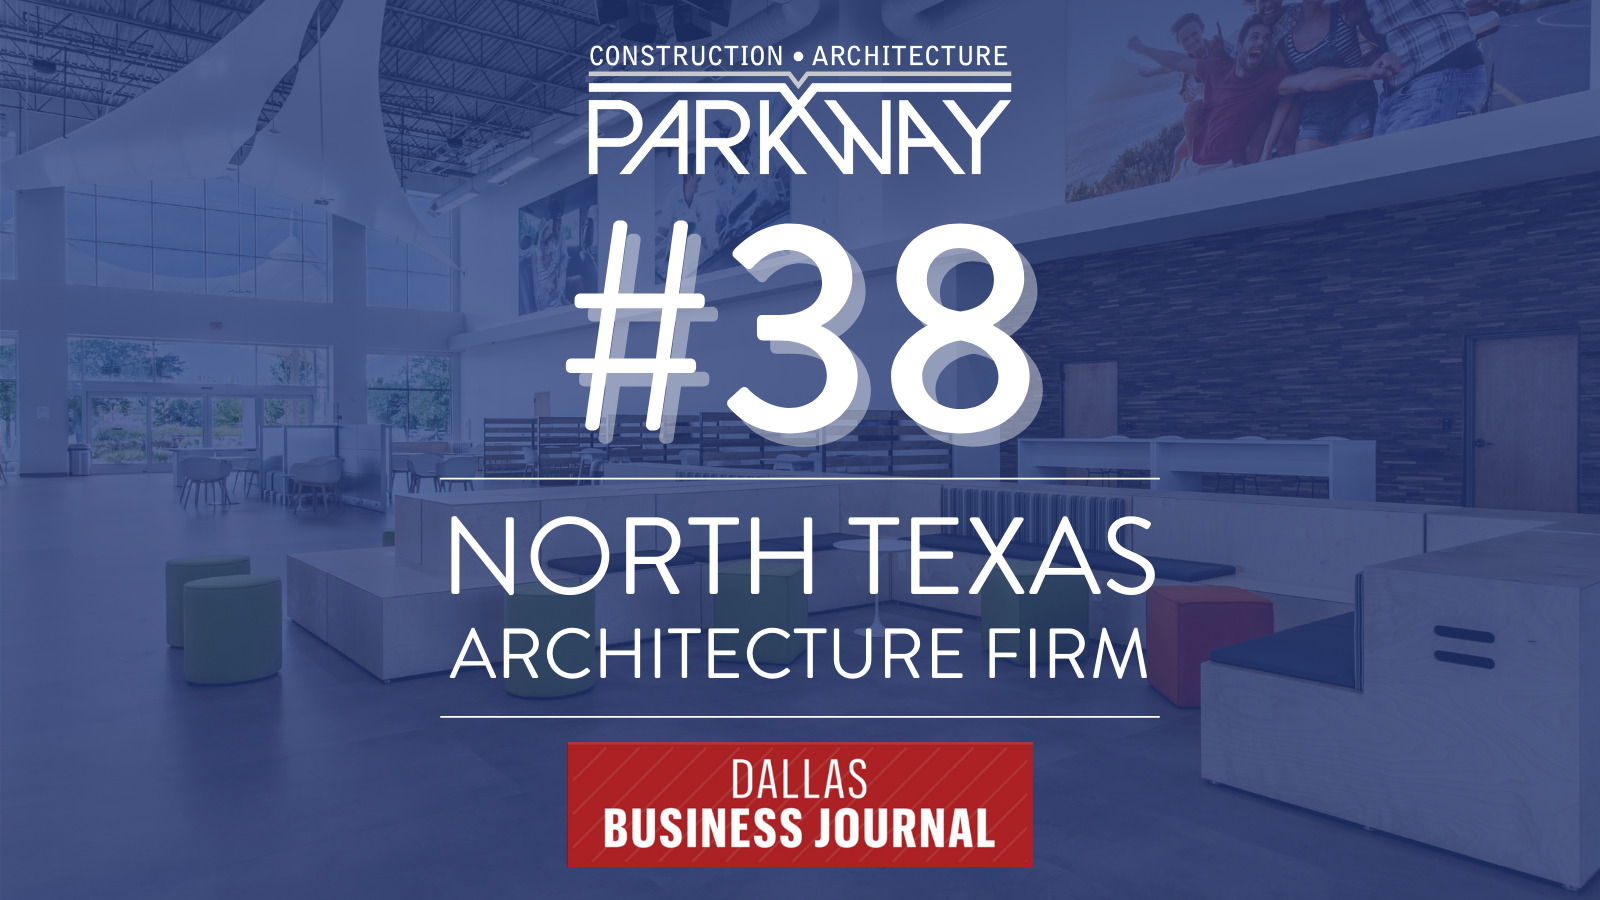 Parkway Named Top Architecture Firm by Dallas Business Journal